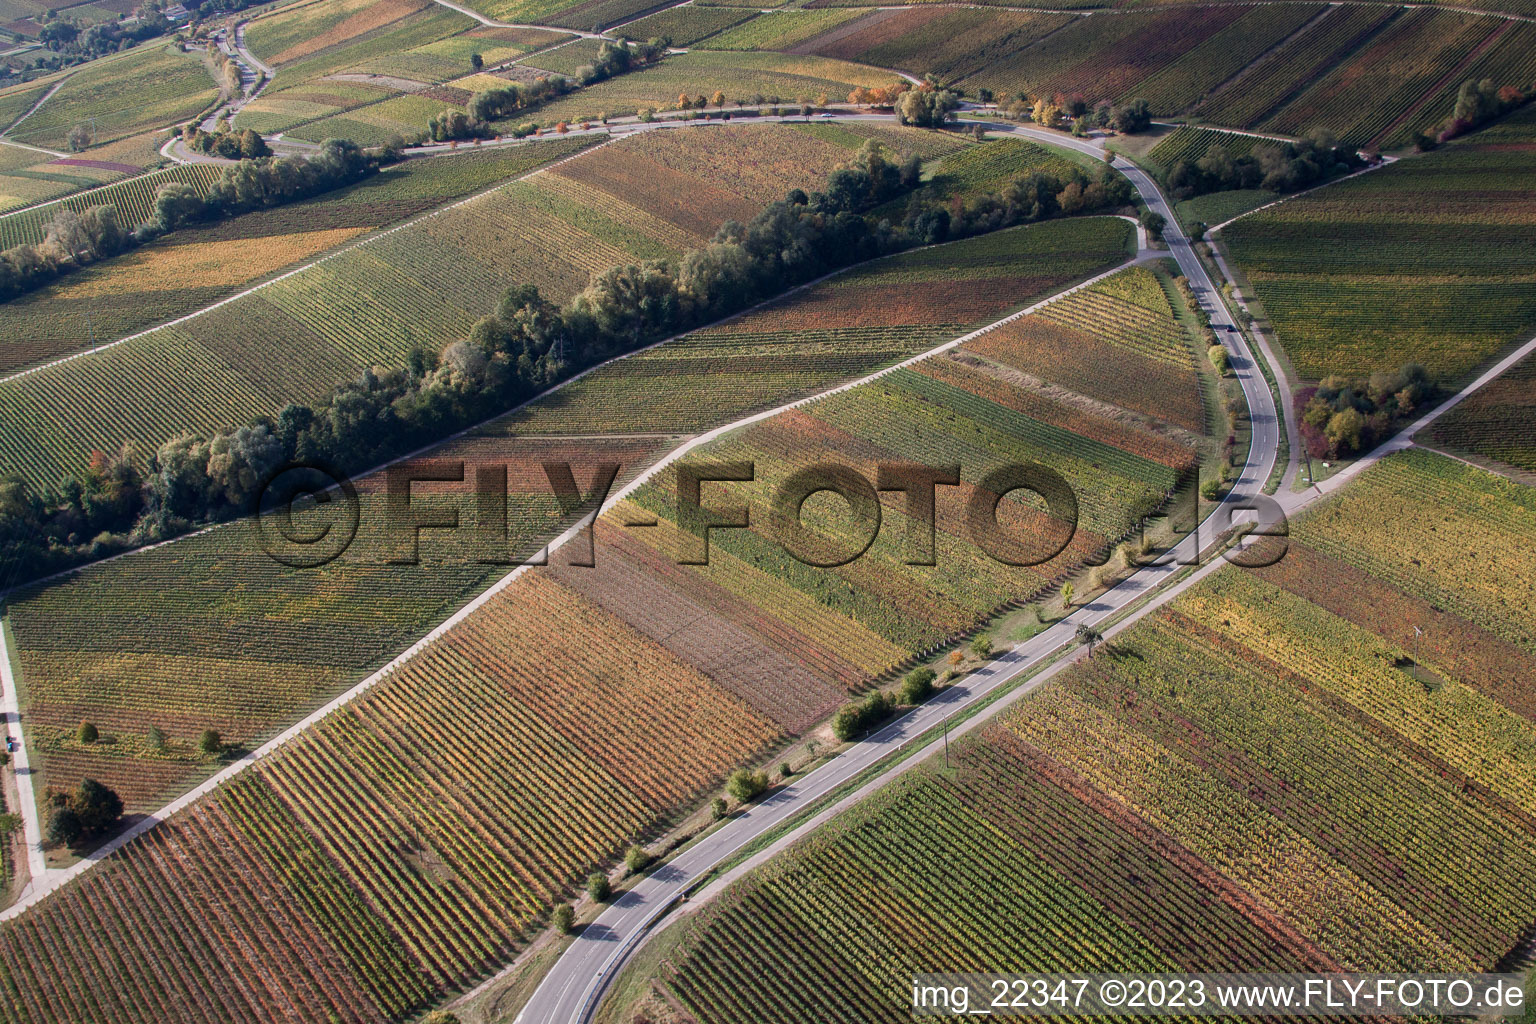 Bird's eye view of Ranschbach in the state Rhineland-Palatinate, Germany